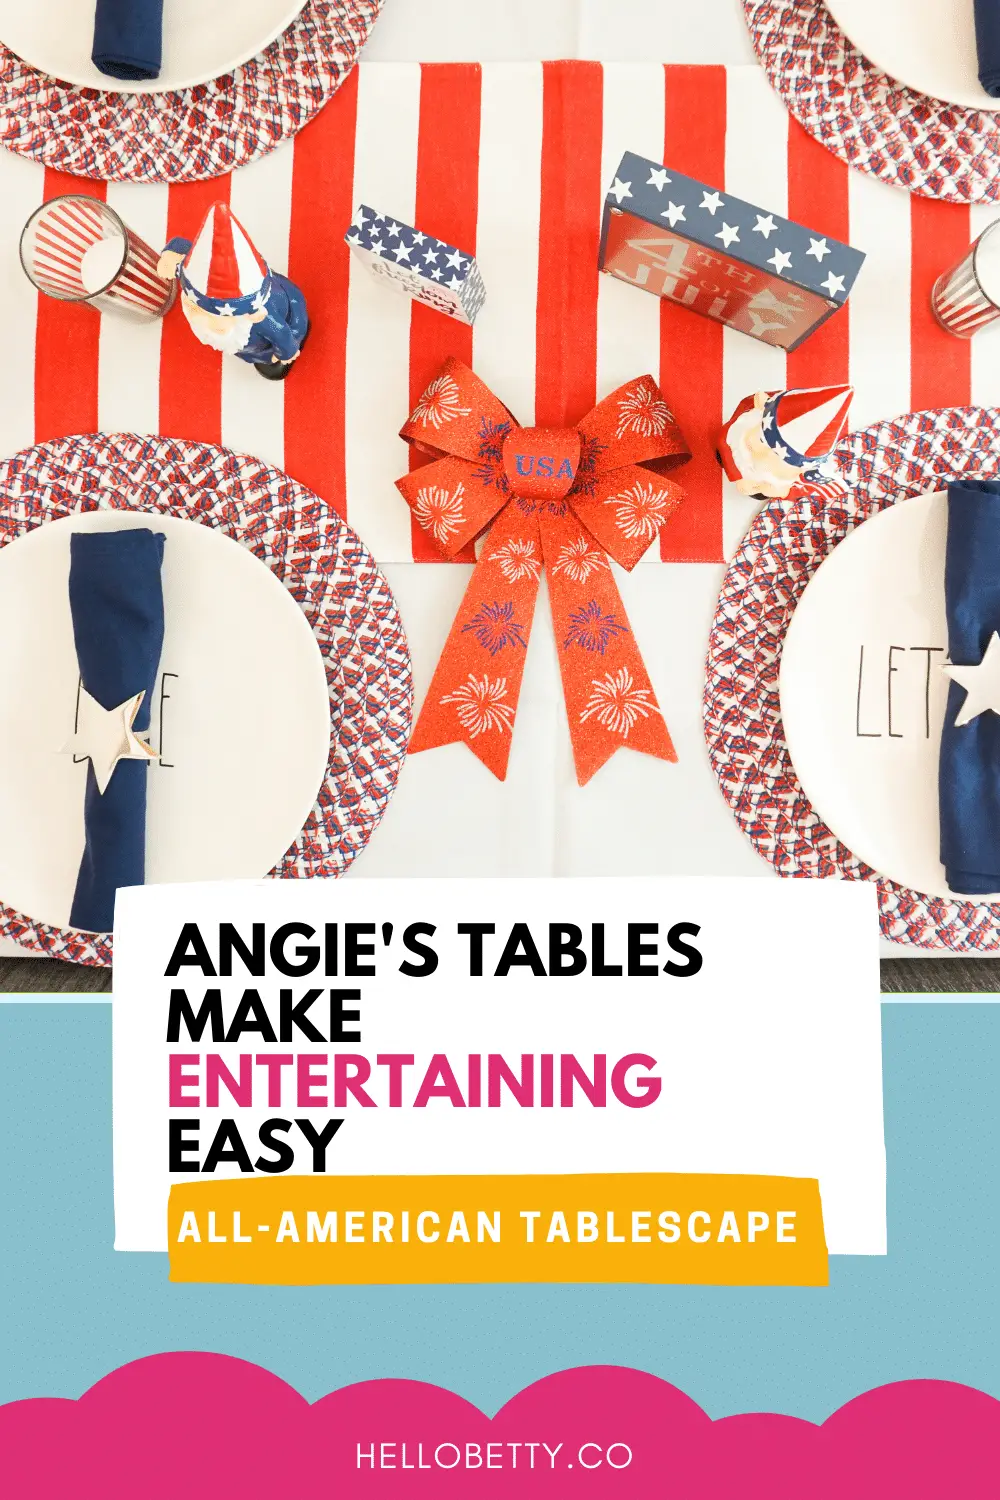 Angie’s Tables Make Entertaining Easy